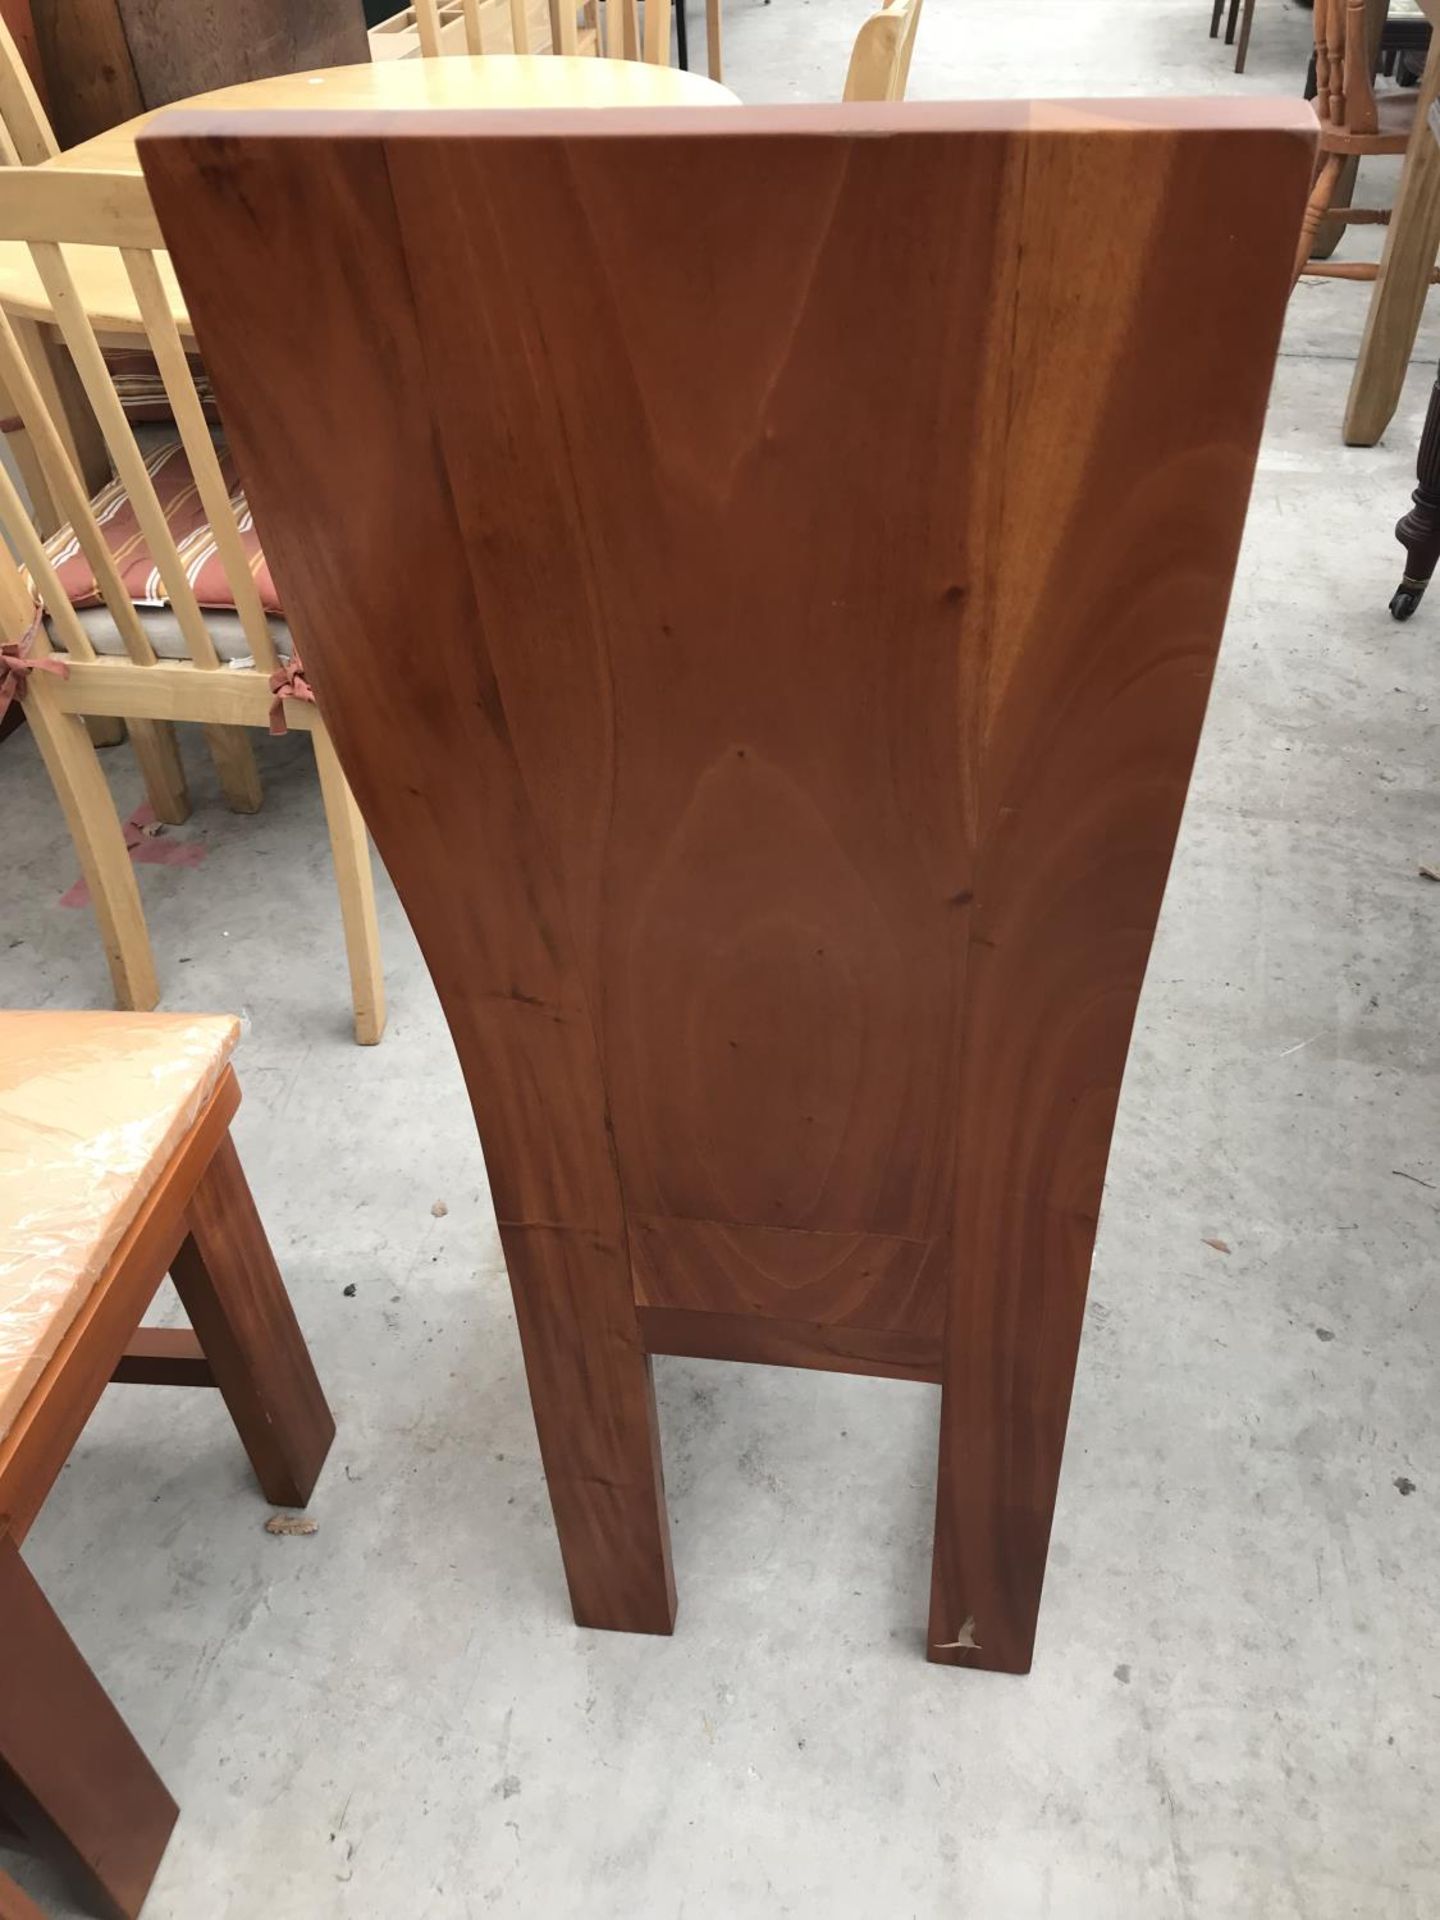 FOUR HIGH BACKED HARDWOOD DINING CHAIRS - Image 3 of 3